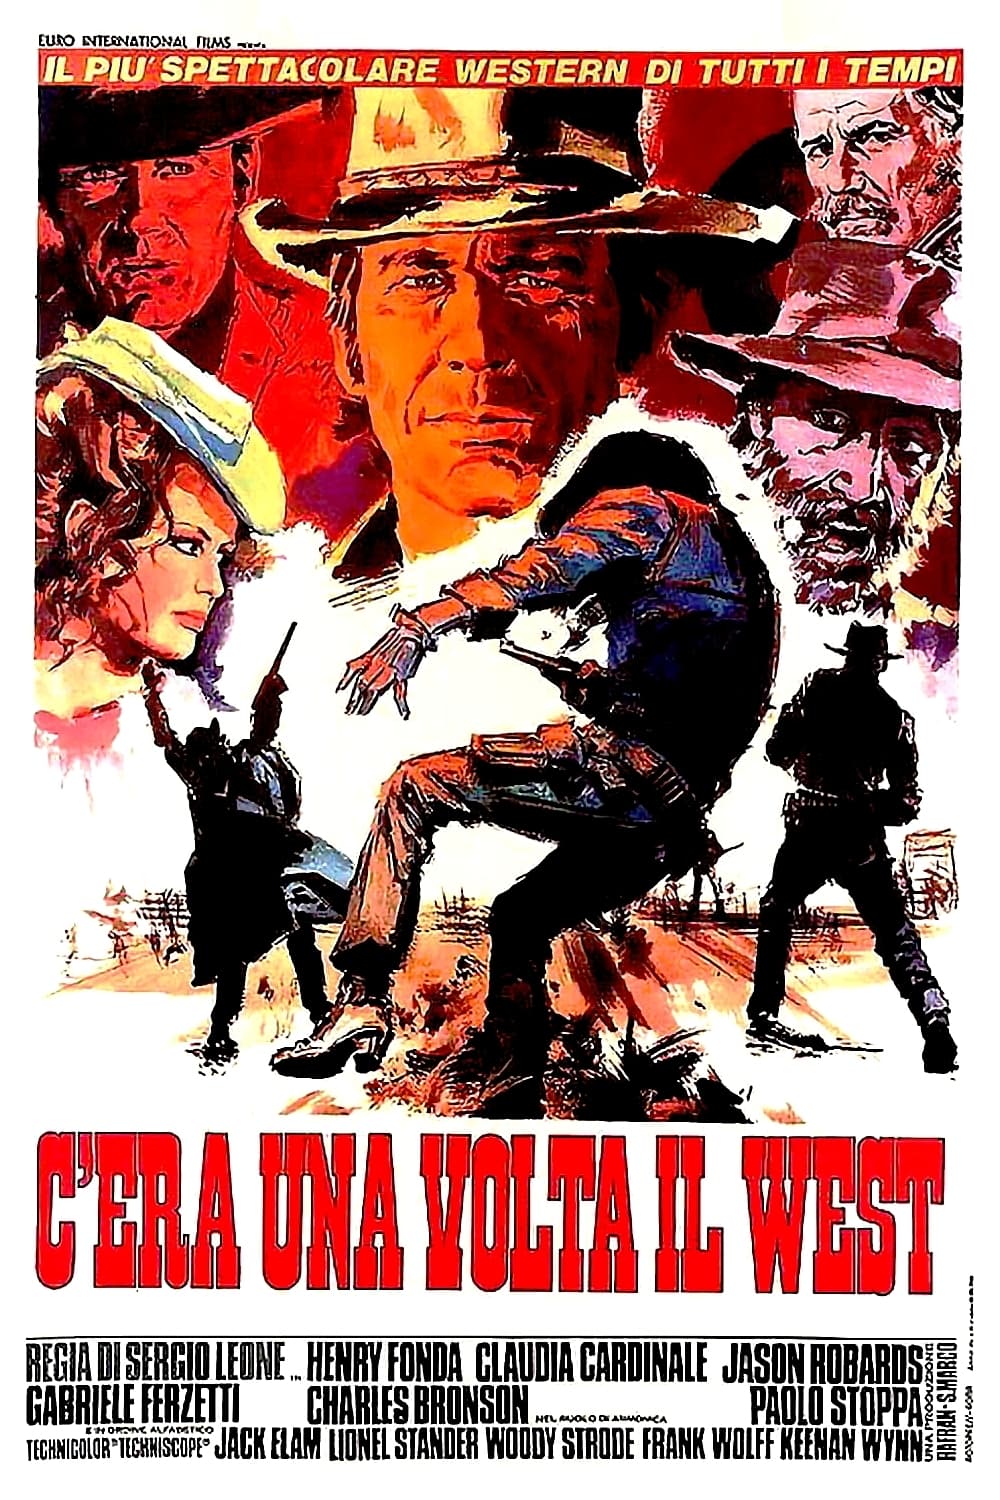 Miền Viễn Tây Ngày Ấy - Once Upon a Time in the West (1968)